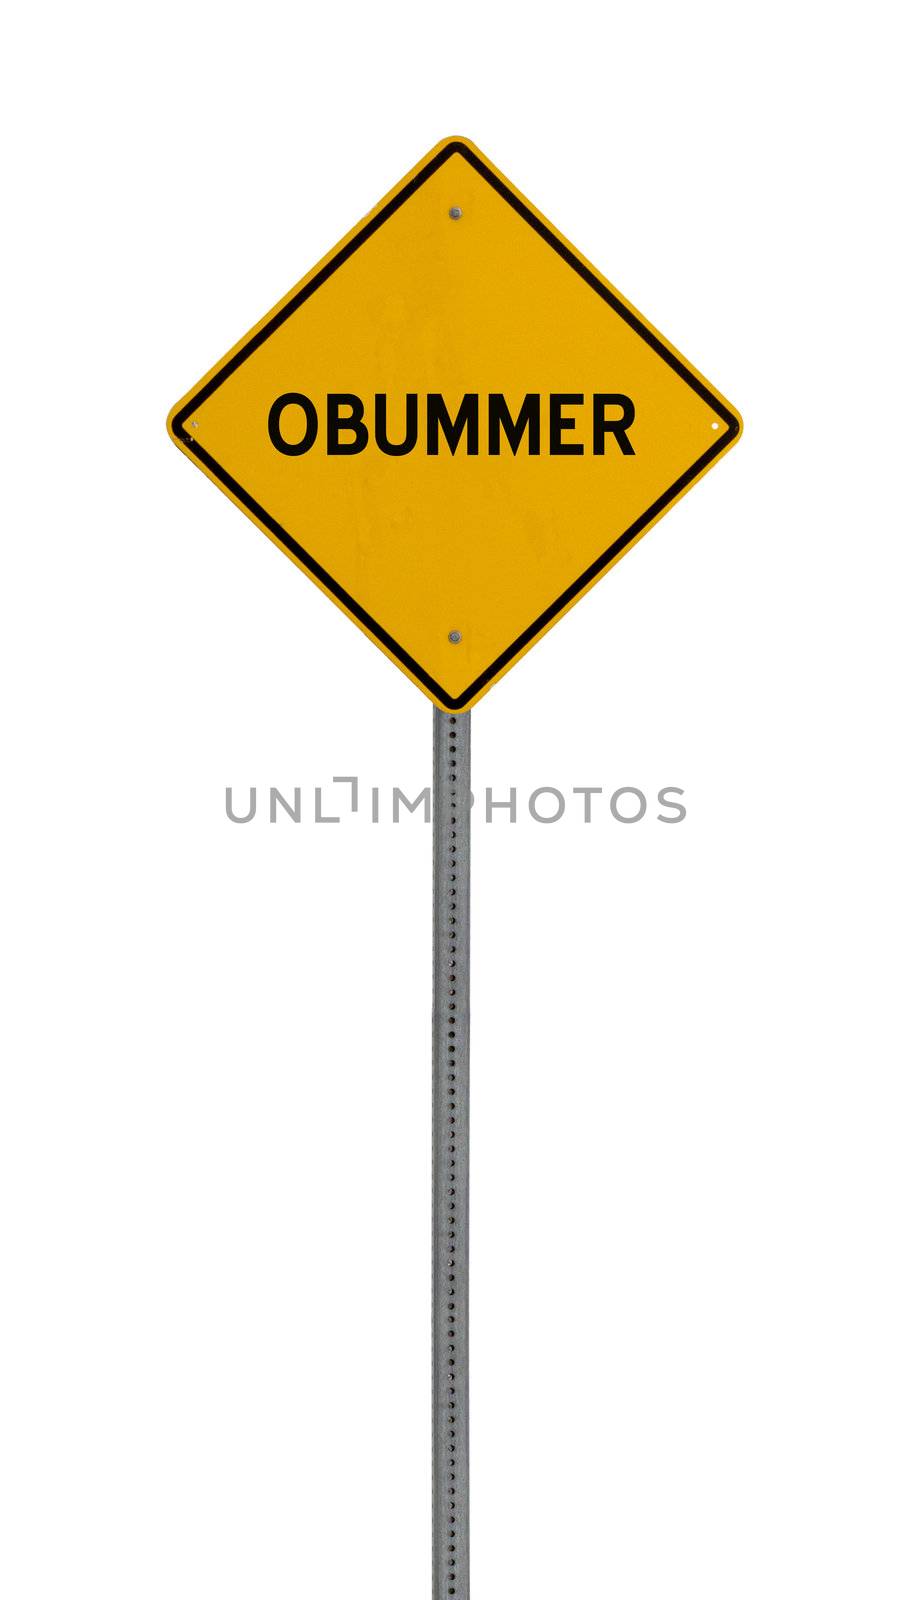 obummer - Yellow road warning sign by jeremywhat